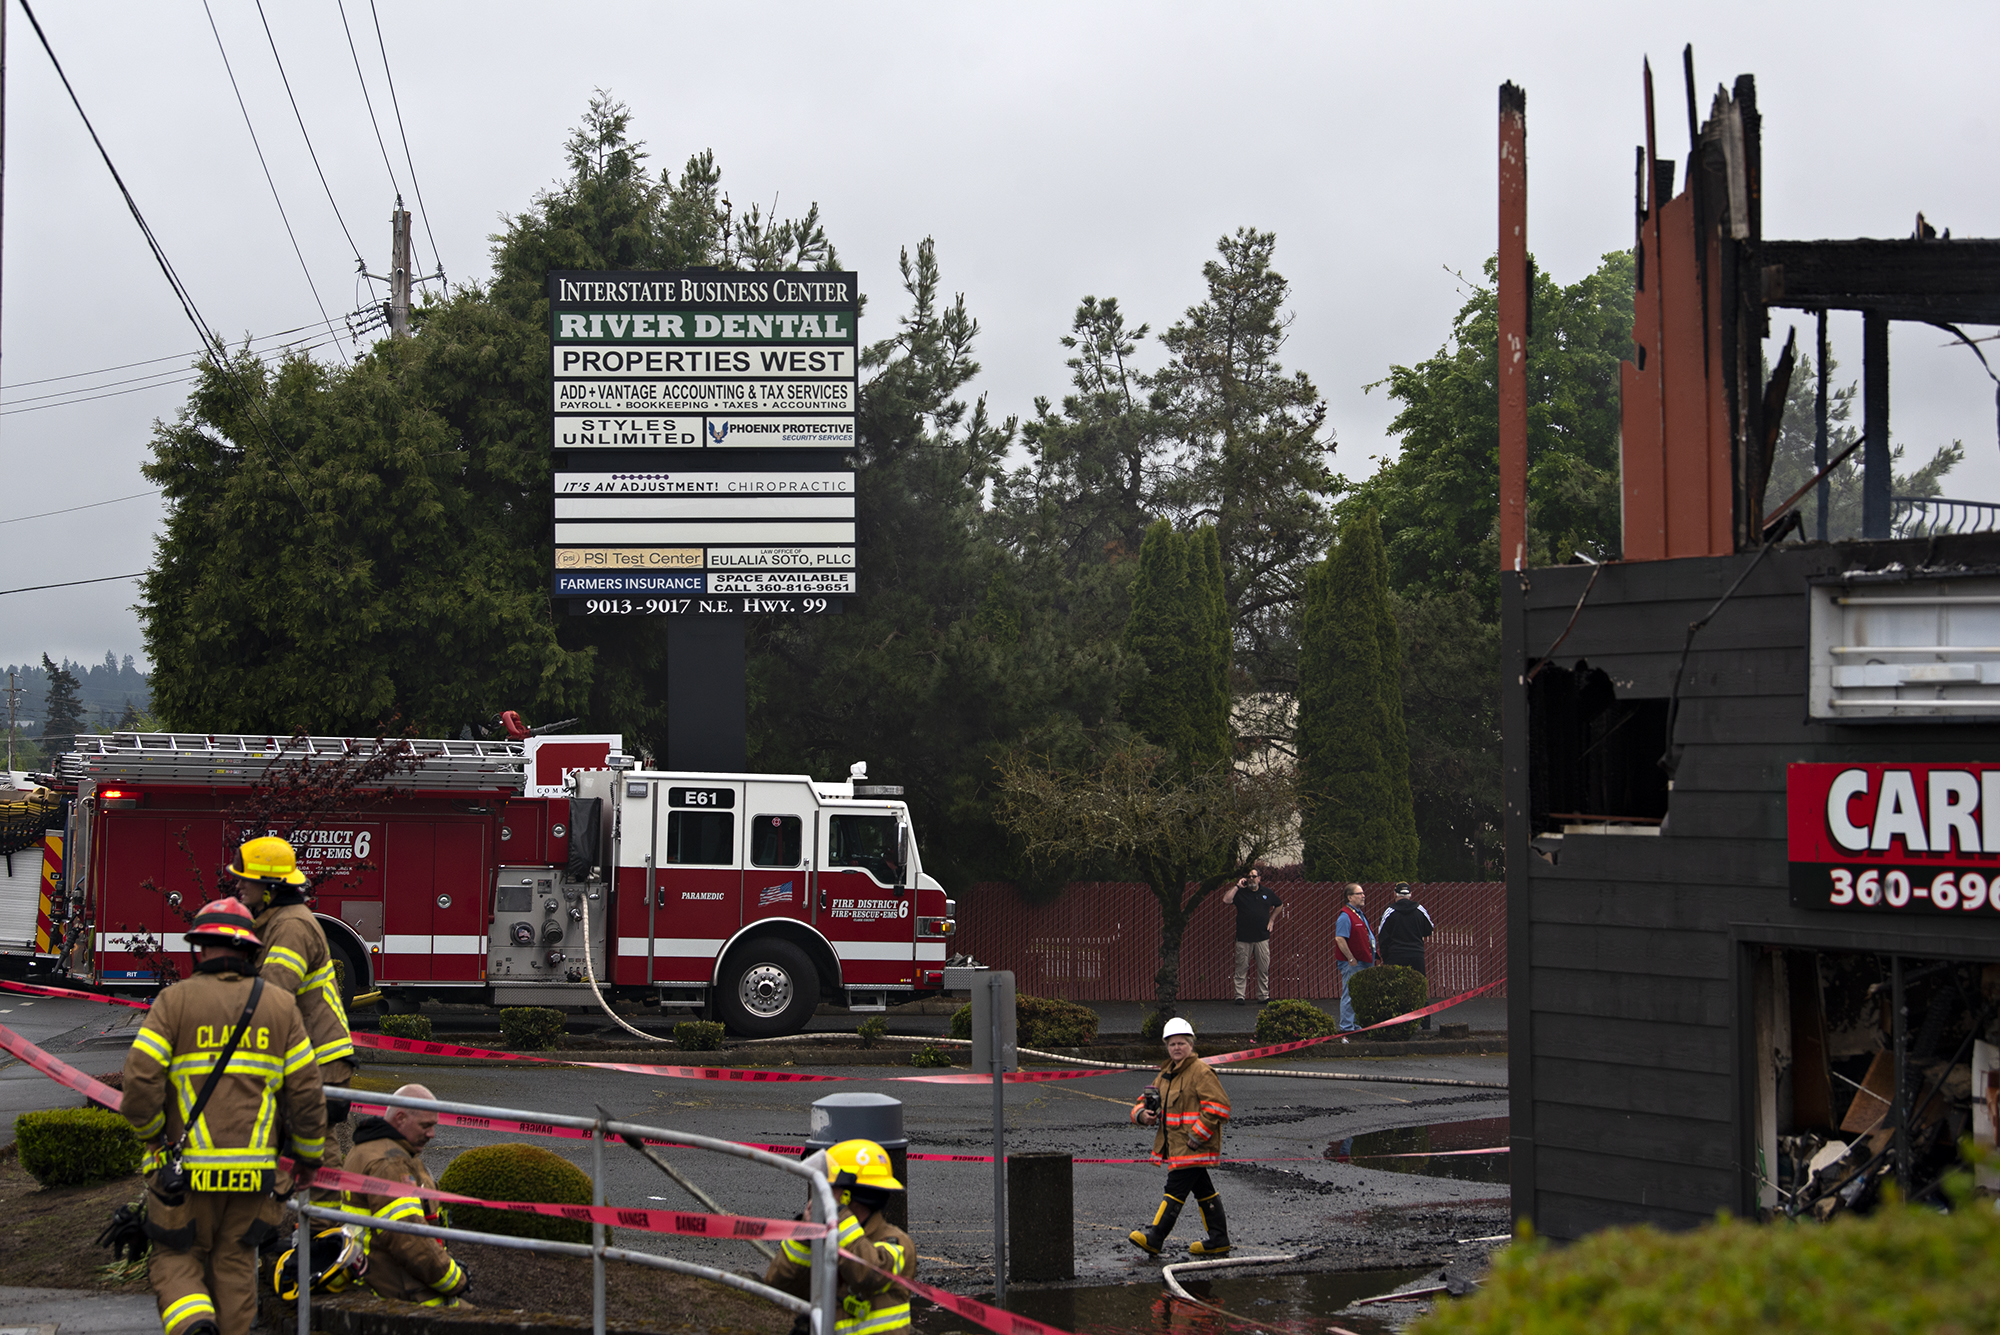 A two alarm fire heavily damages a building at the Interstate Business Center in Hazel Dell, as seen on Wednesday morning, May 25, 2022.